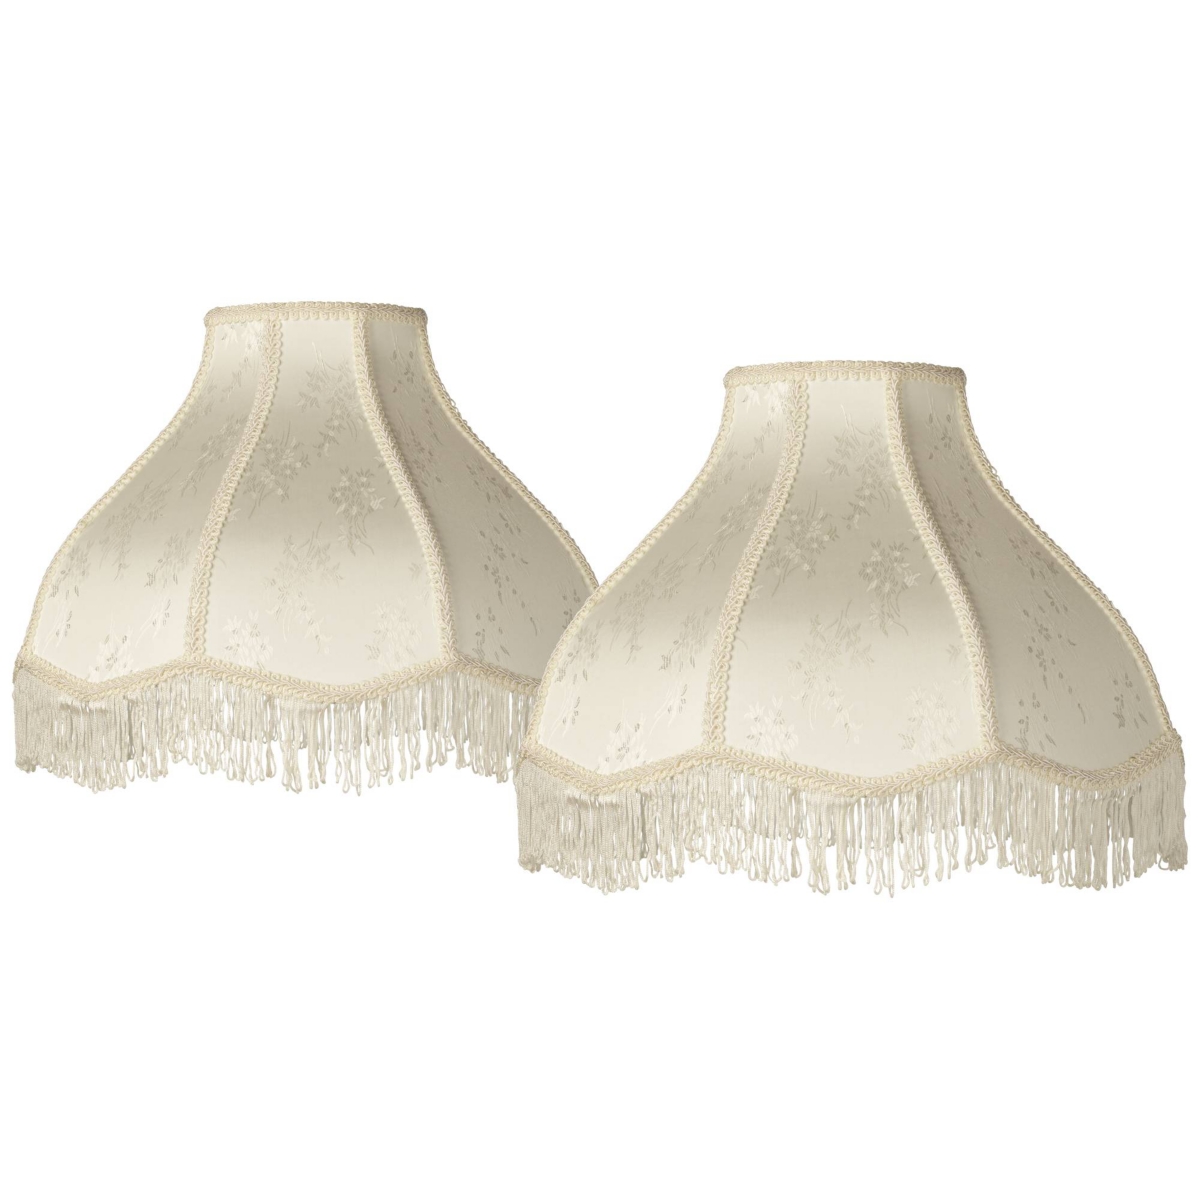 Springcrest Set Of 2 Hardback Scallop Dome Lamp Shades Cream Floral Bouquet Large 6" Top X 17" Bottom X 11" High In White